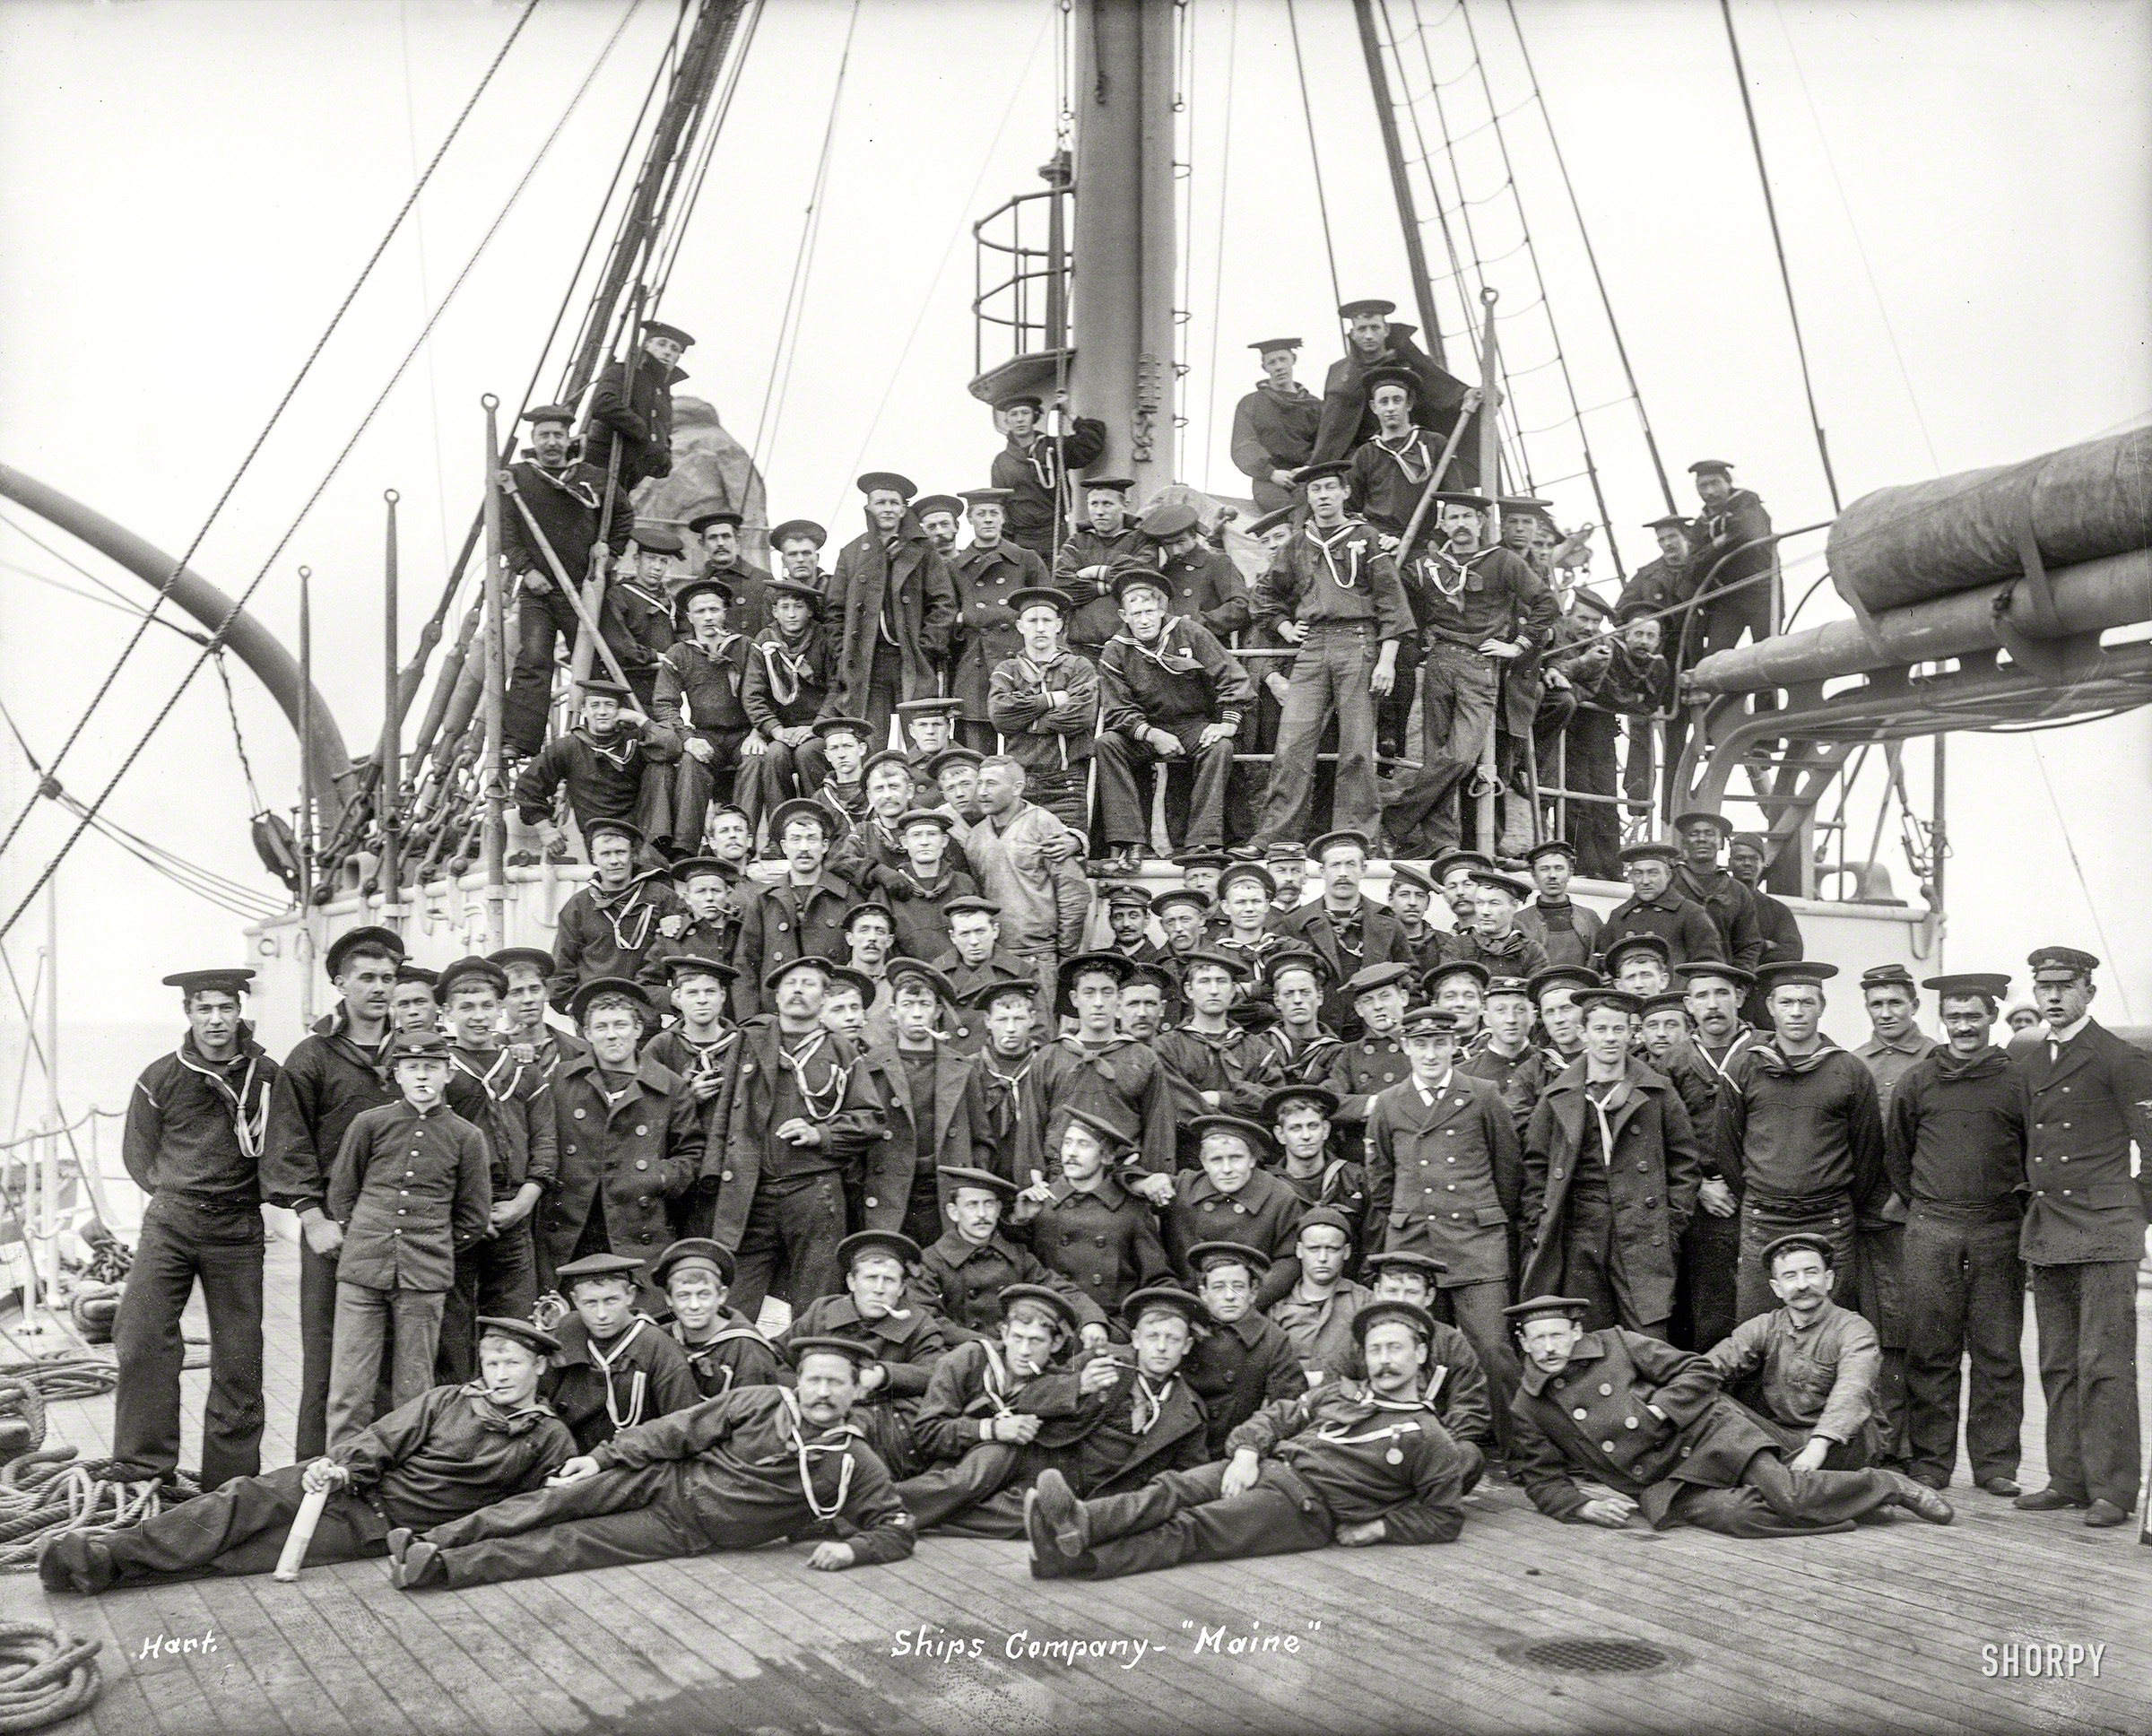 Circa 1896. "Ship's company, U.S.S. Maine." Two years before the battleship blew up and sank in Havana Harbor, killing most of the crew and precipitating the Spanish-American War. 8x10 glass negative by Edward H. Hart. View full size.